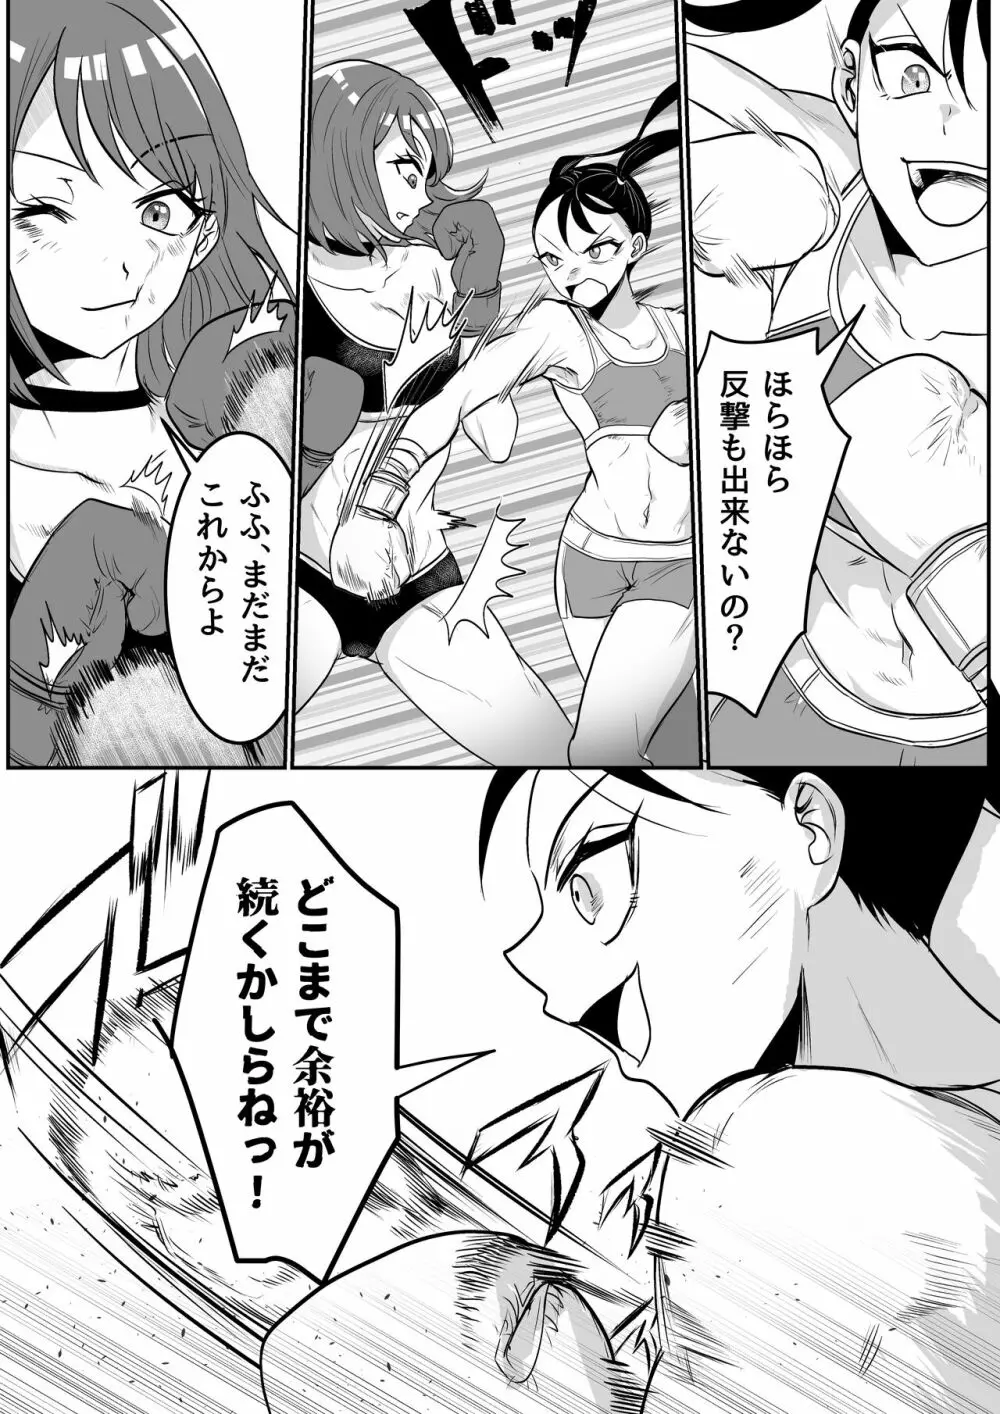 Fighting School 3 - page6